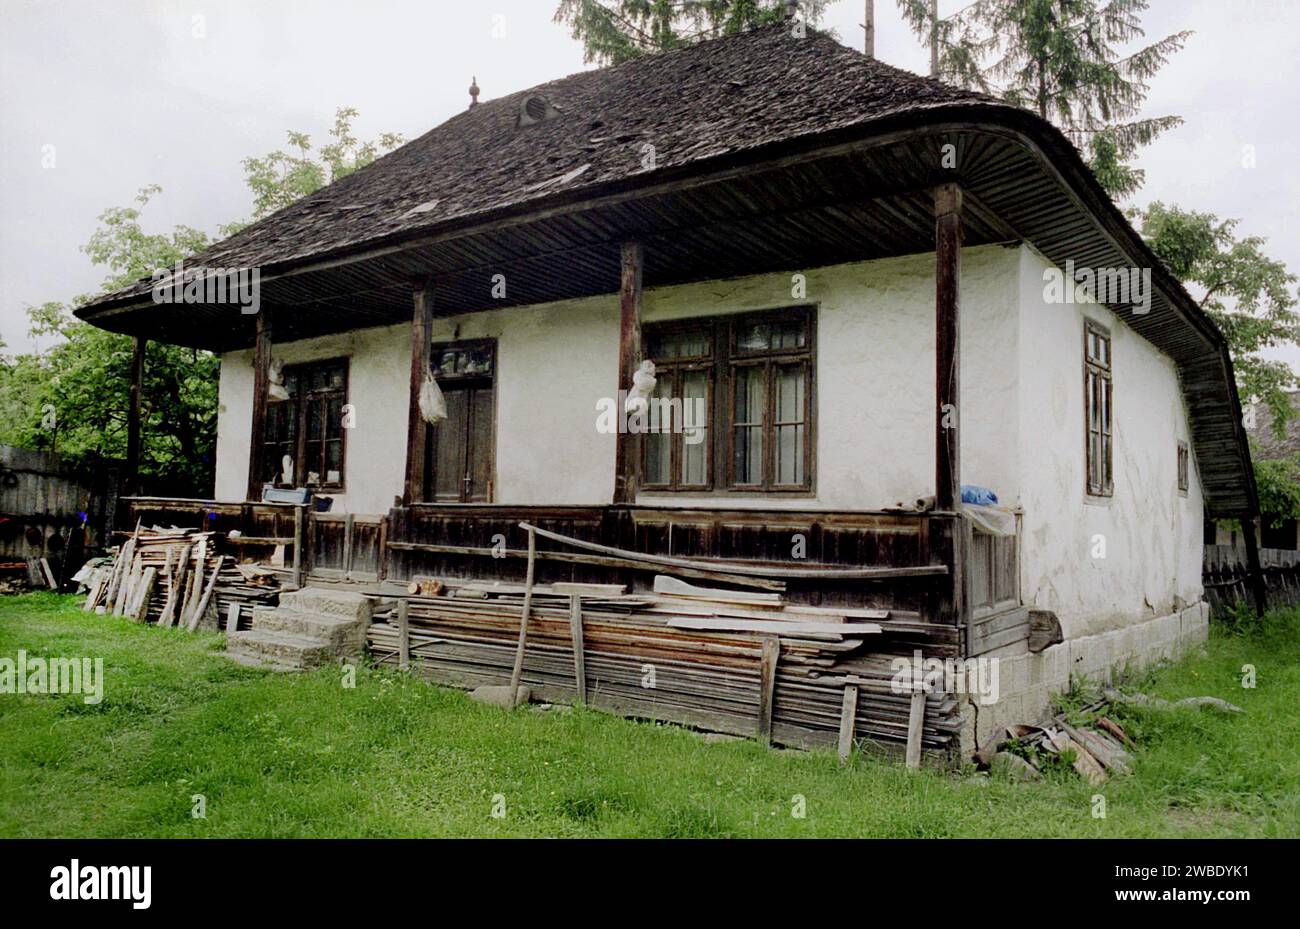 Vrancea County, Romania, approx. 1995. A traditional house with wooden roof in poor condition. Timber stacked in the yard. Stock Photo